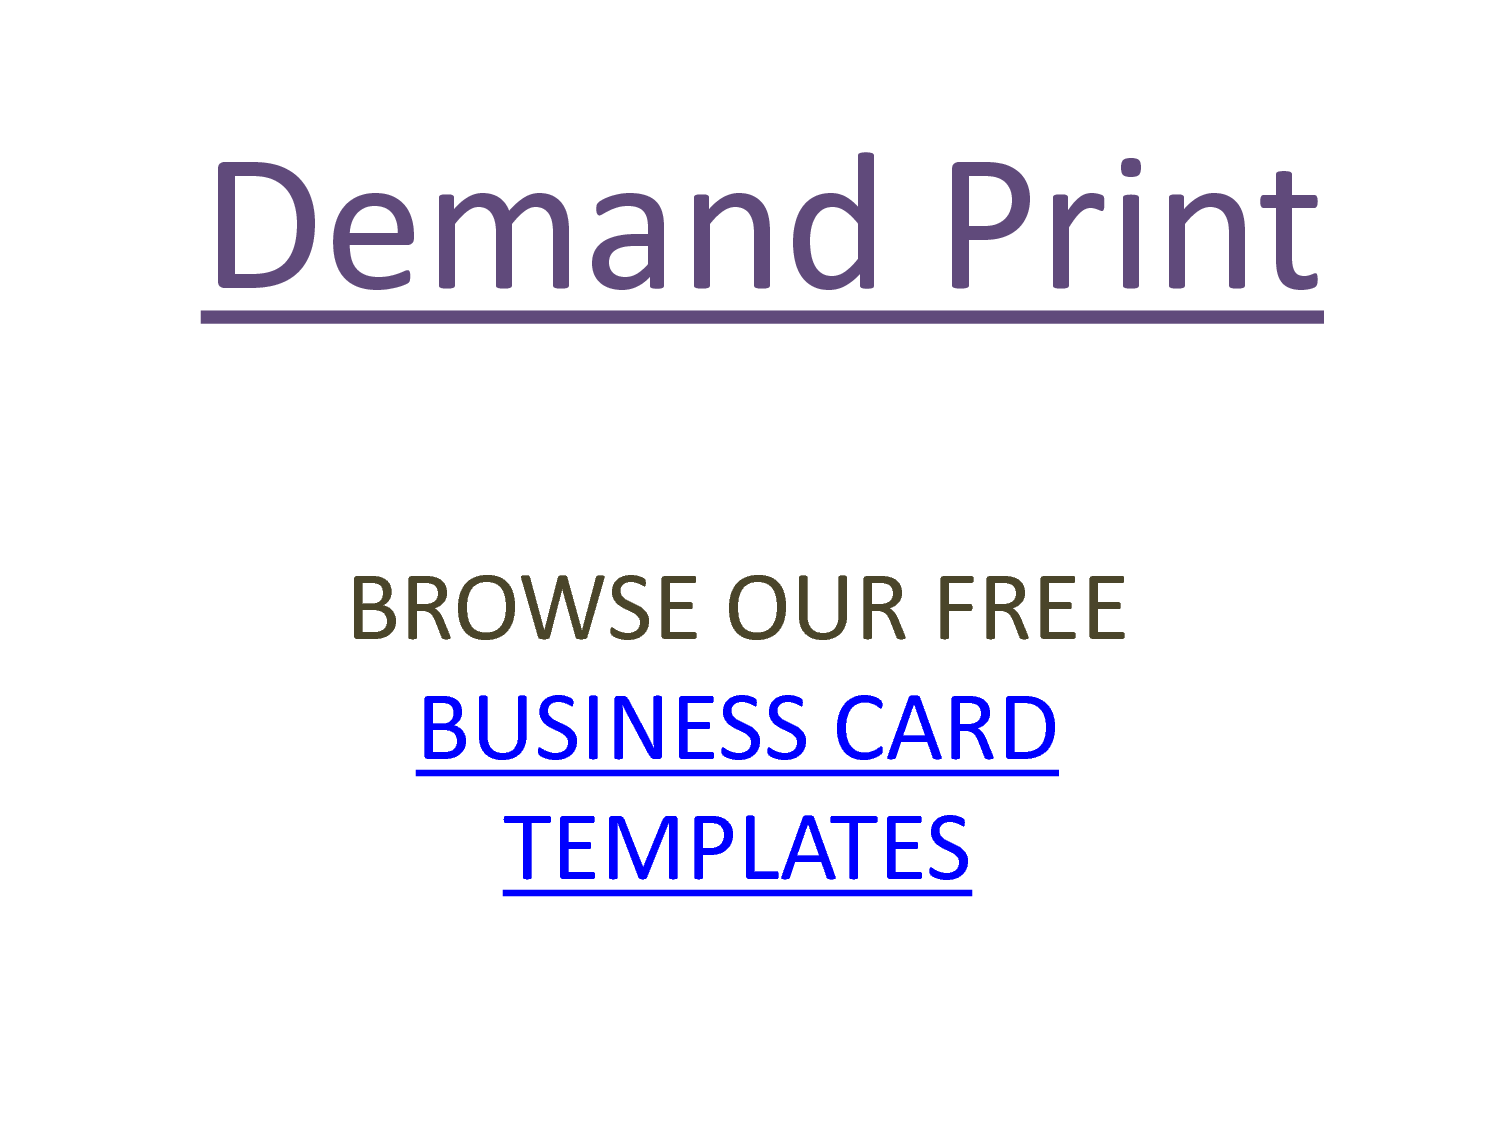 23 Free PowerPoint Designs Business Card Images - PowerPoint Free Within Christian Business Cards Templates Free